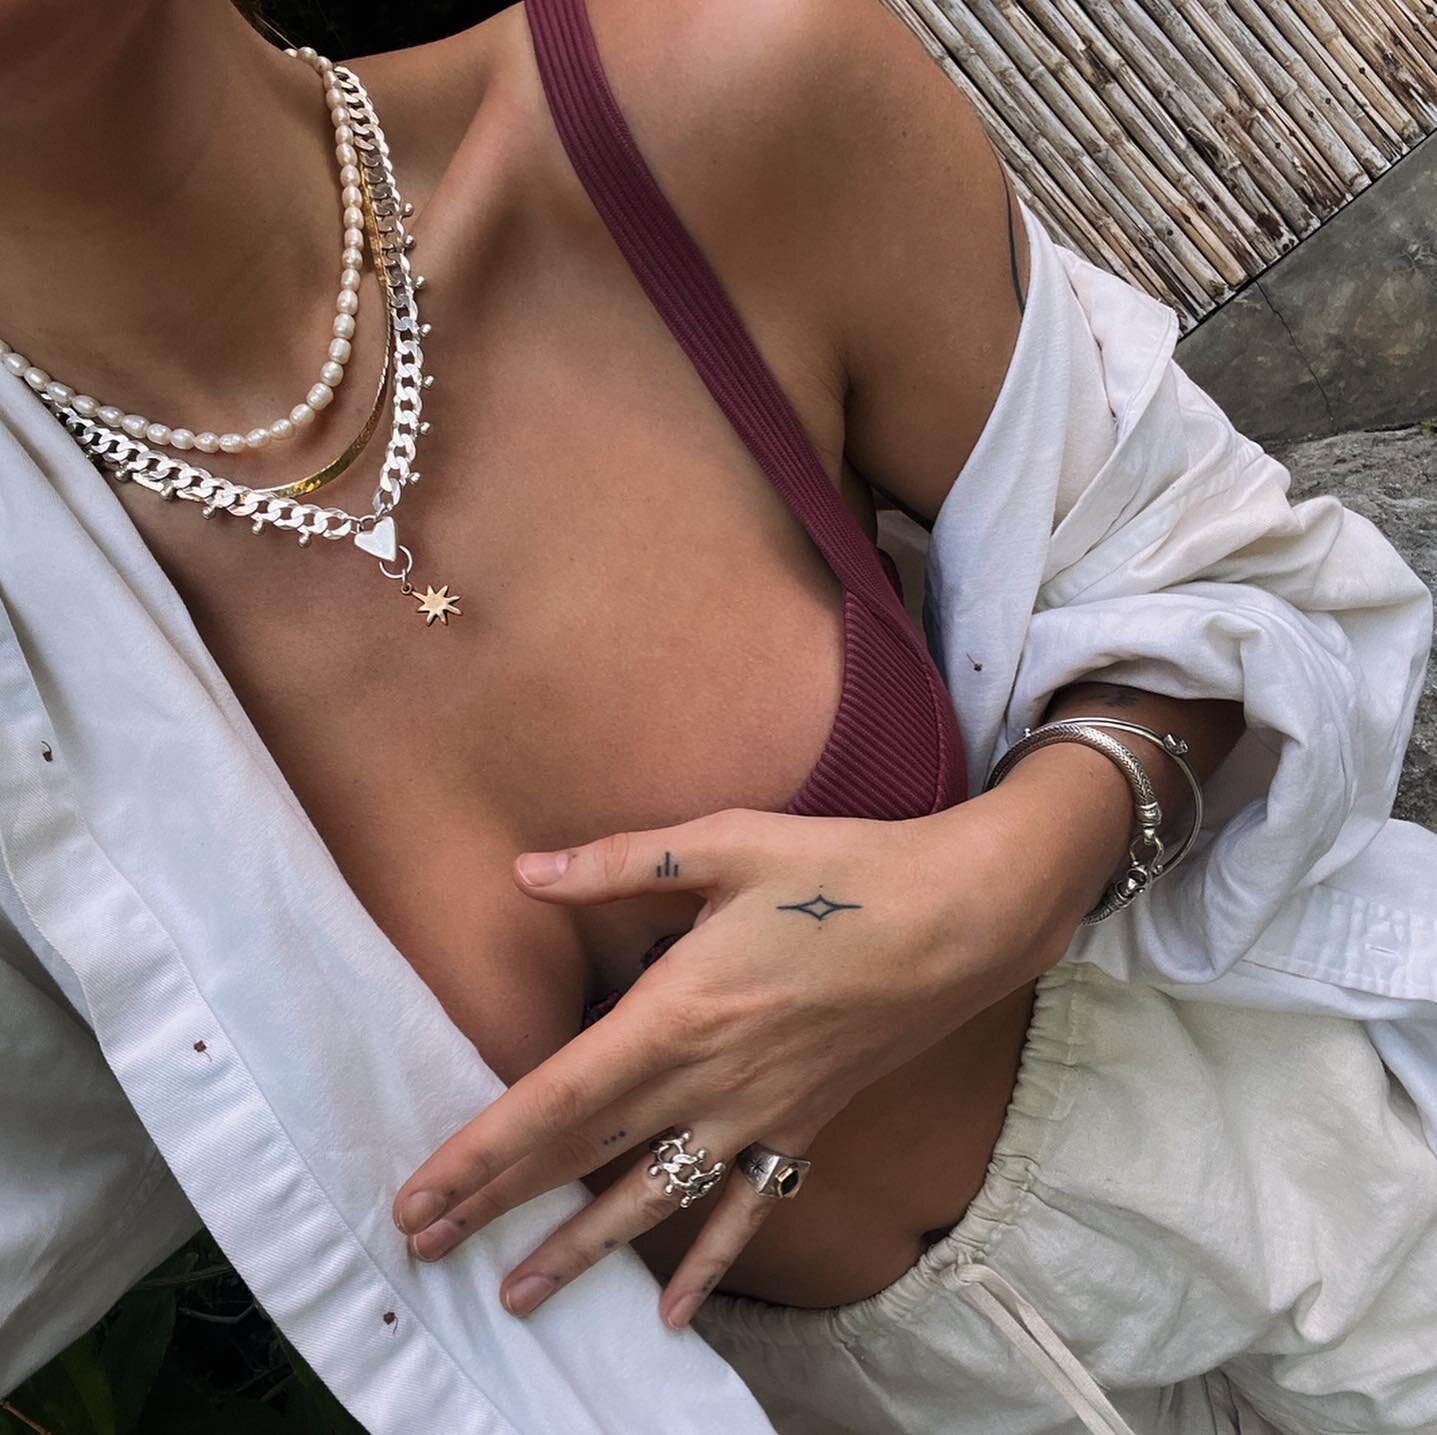 Tested and approved - My new favorite necklace can be worn 24/7 on an international trip. Not taken off once for swimming in the ocean, salty sand, tuk tuk rides, dock jumping, bottomless rums, sun burns, and ungodly layovers. I tested it, so you don